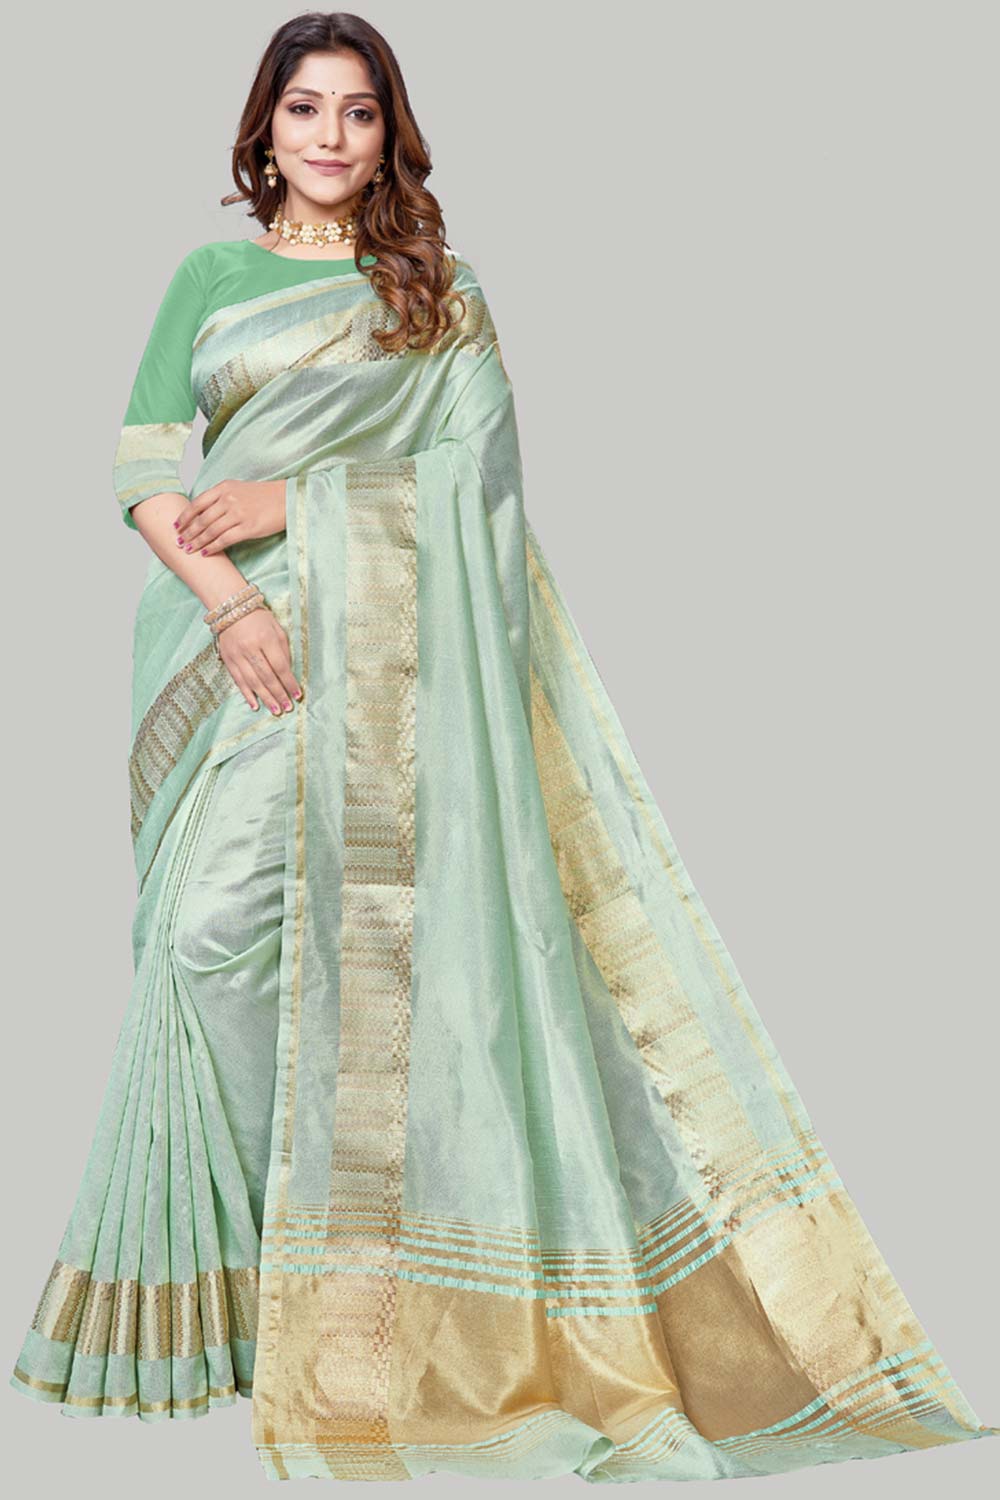 Buy Jute Cotton Woven Border Solid Saree in Sea Green Online